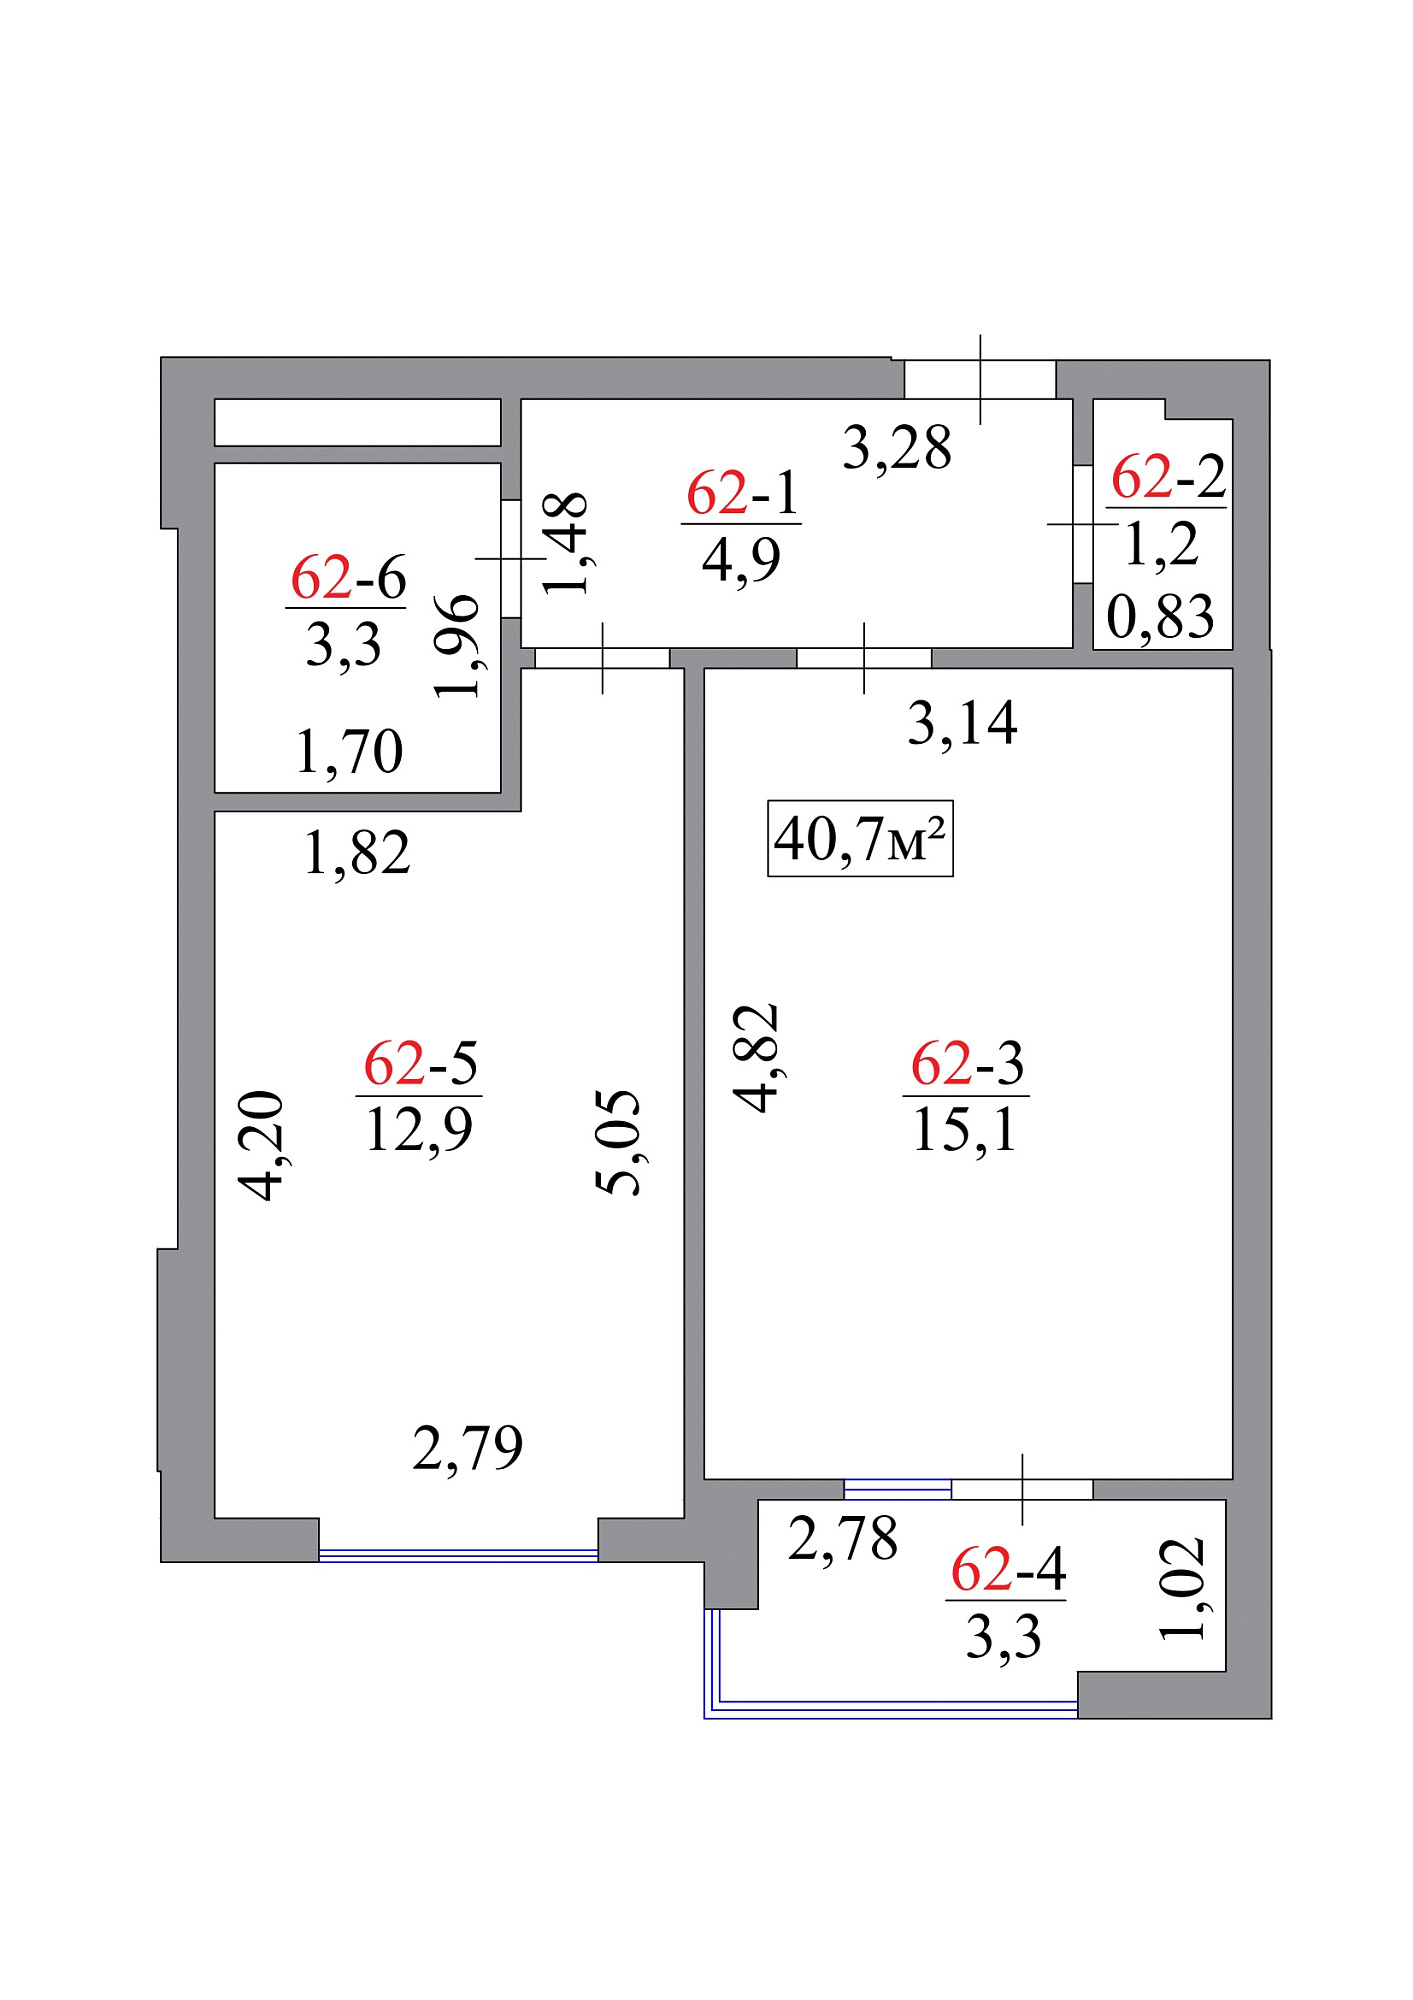 Planning 1-rm flats area 40.7m2, AB-07-07/00056.